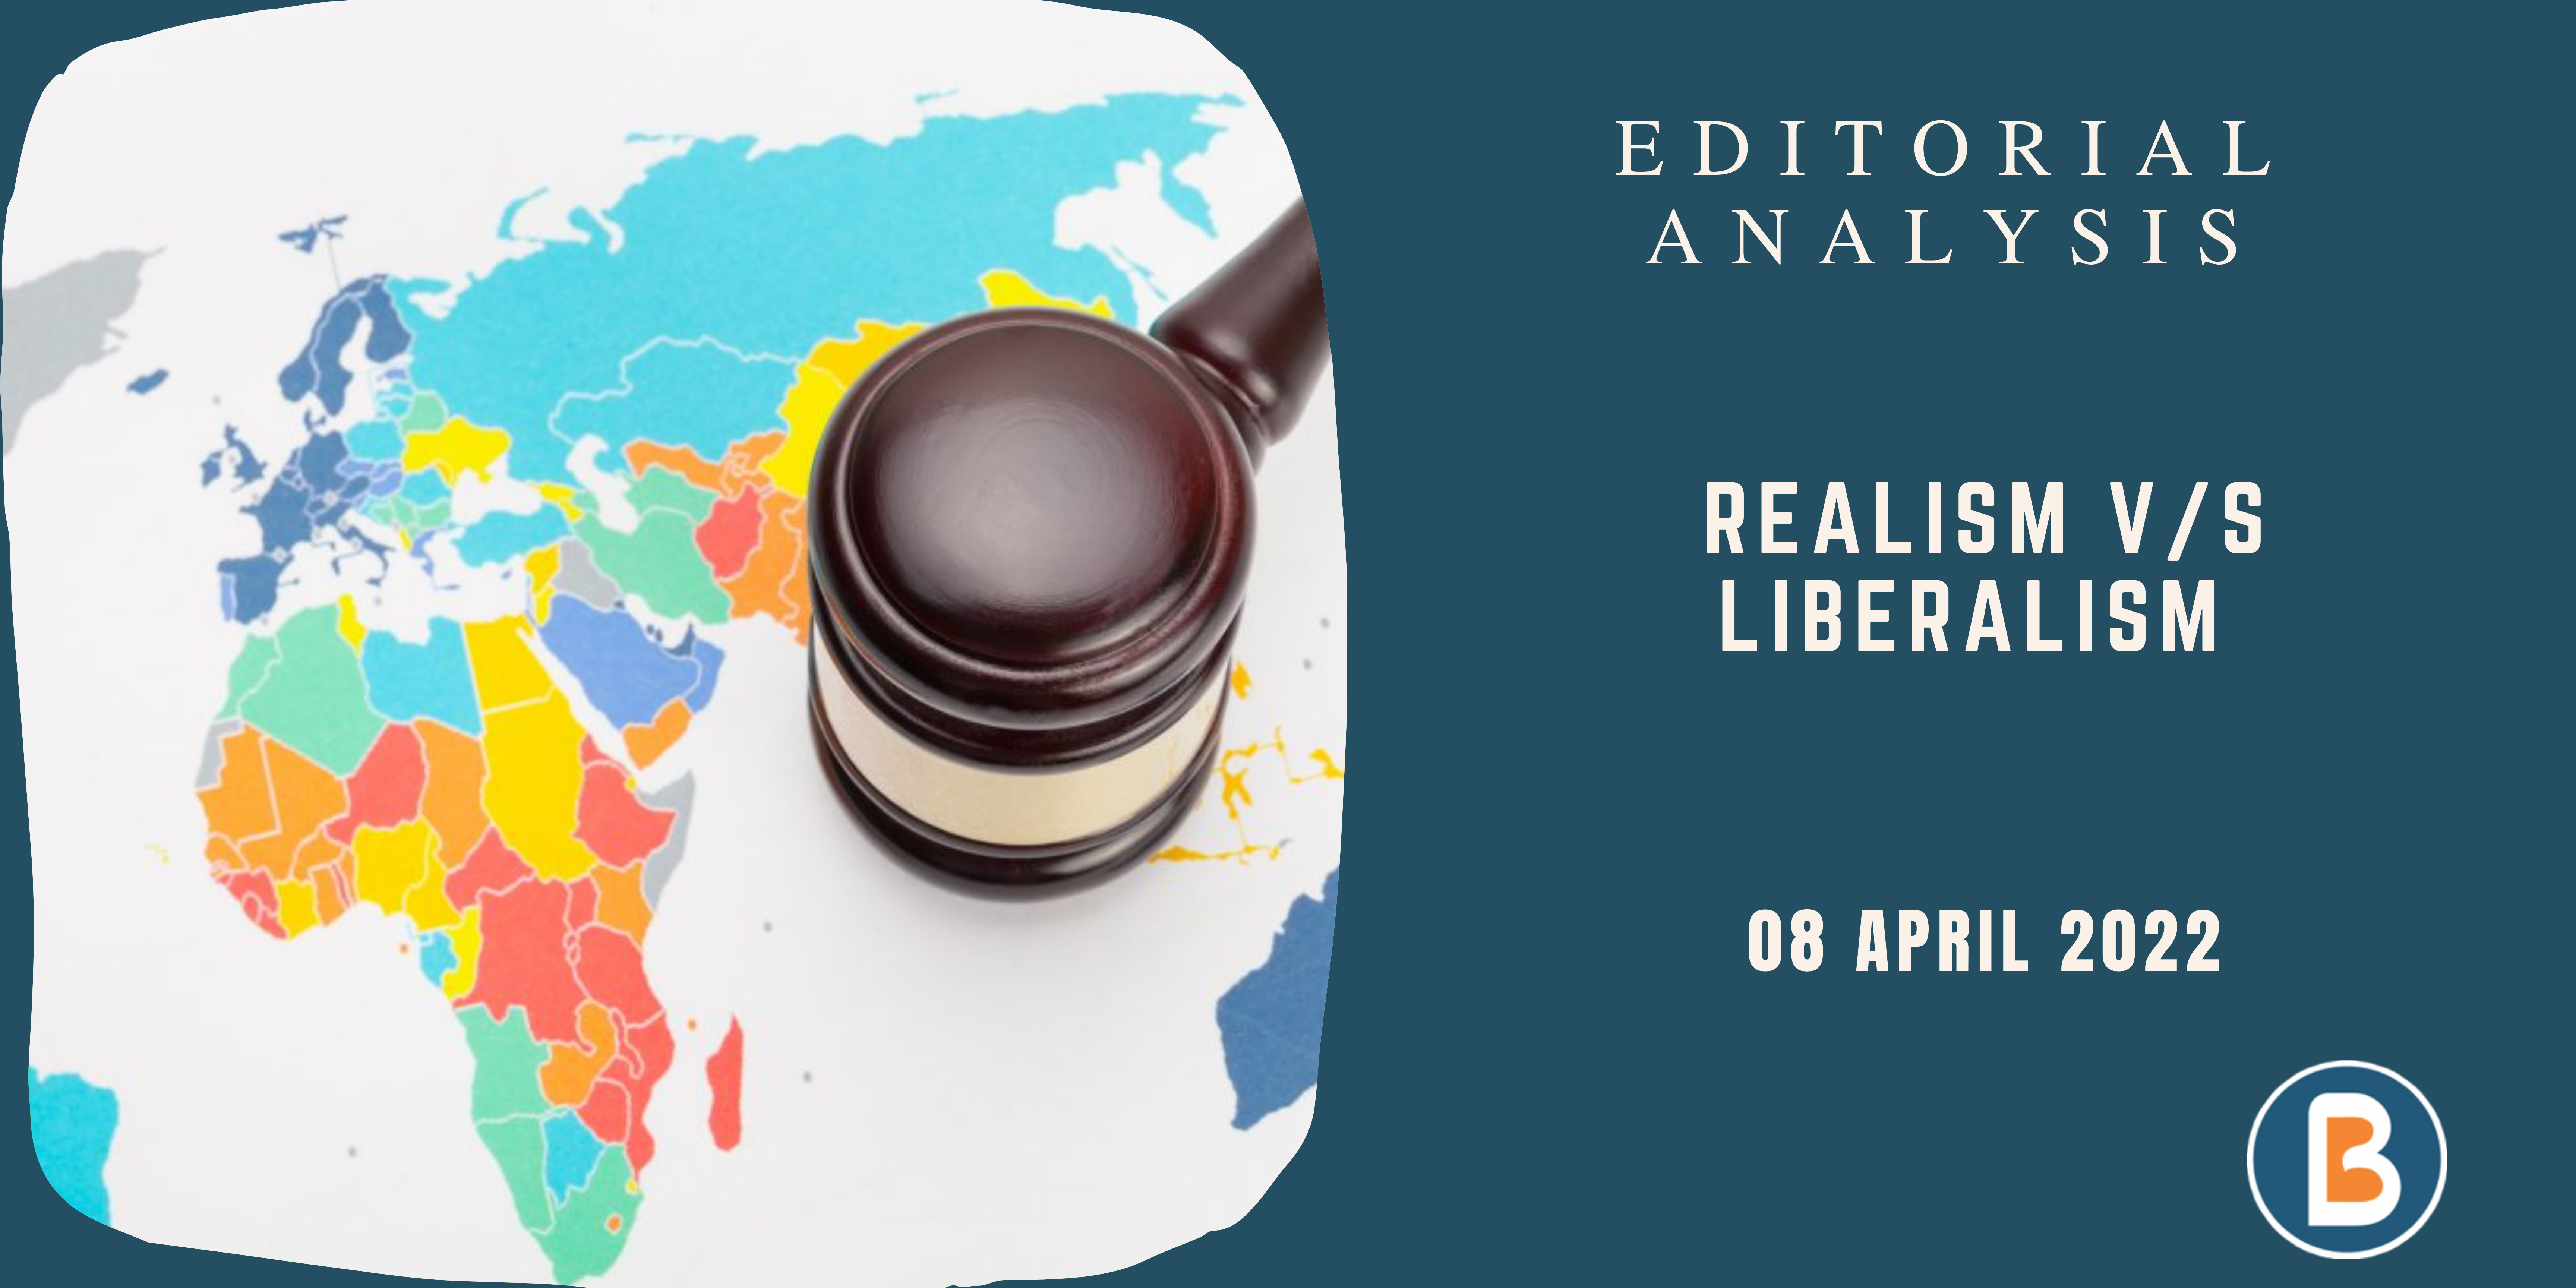 Editorial Analysis for UPSC - Realism v/s Liberalism